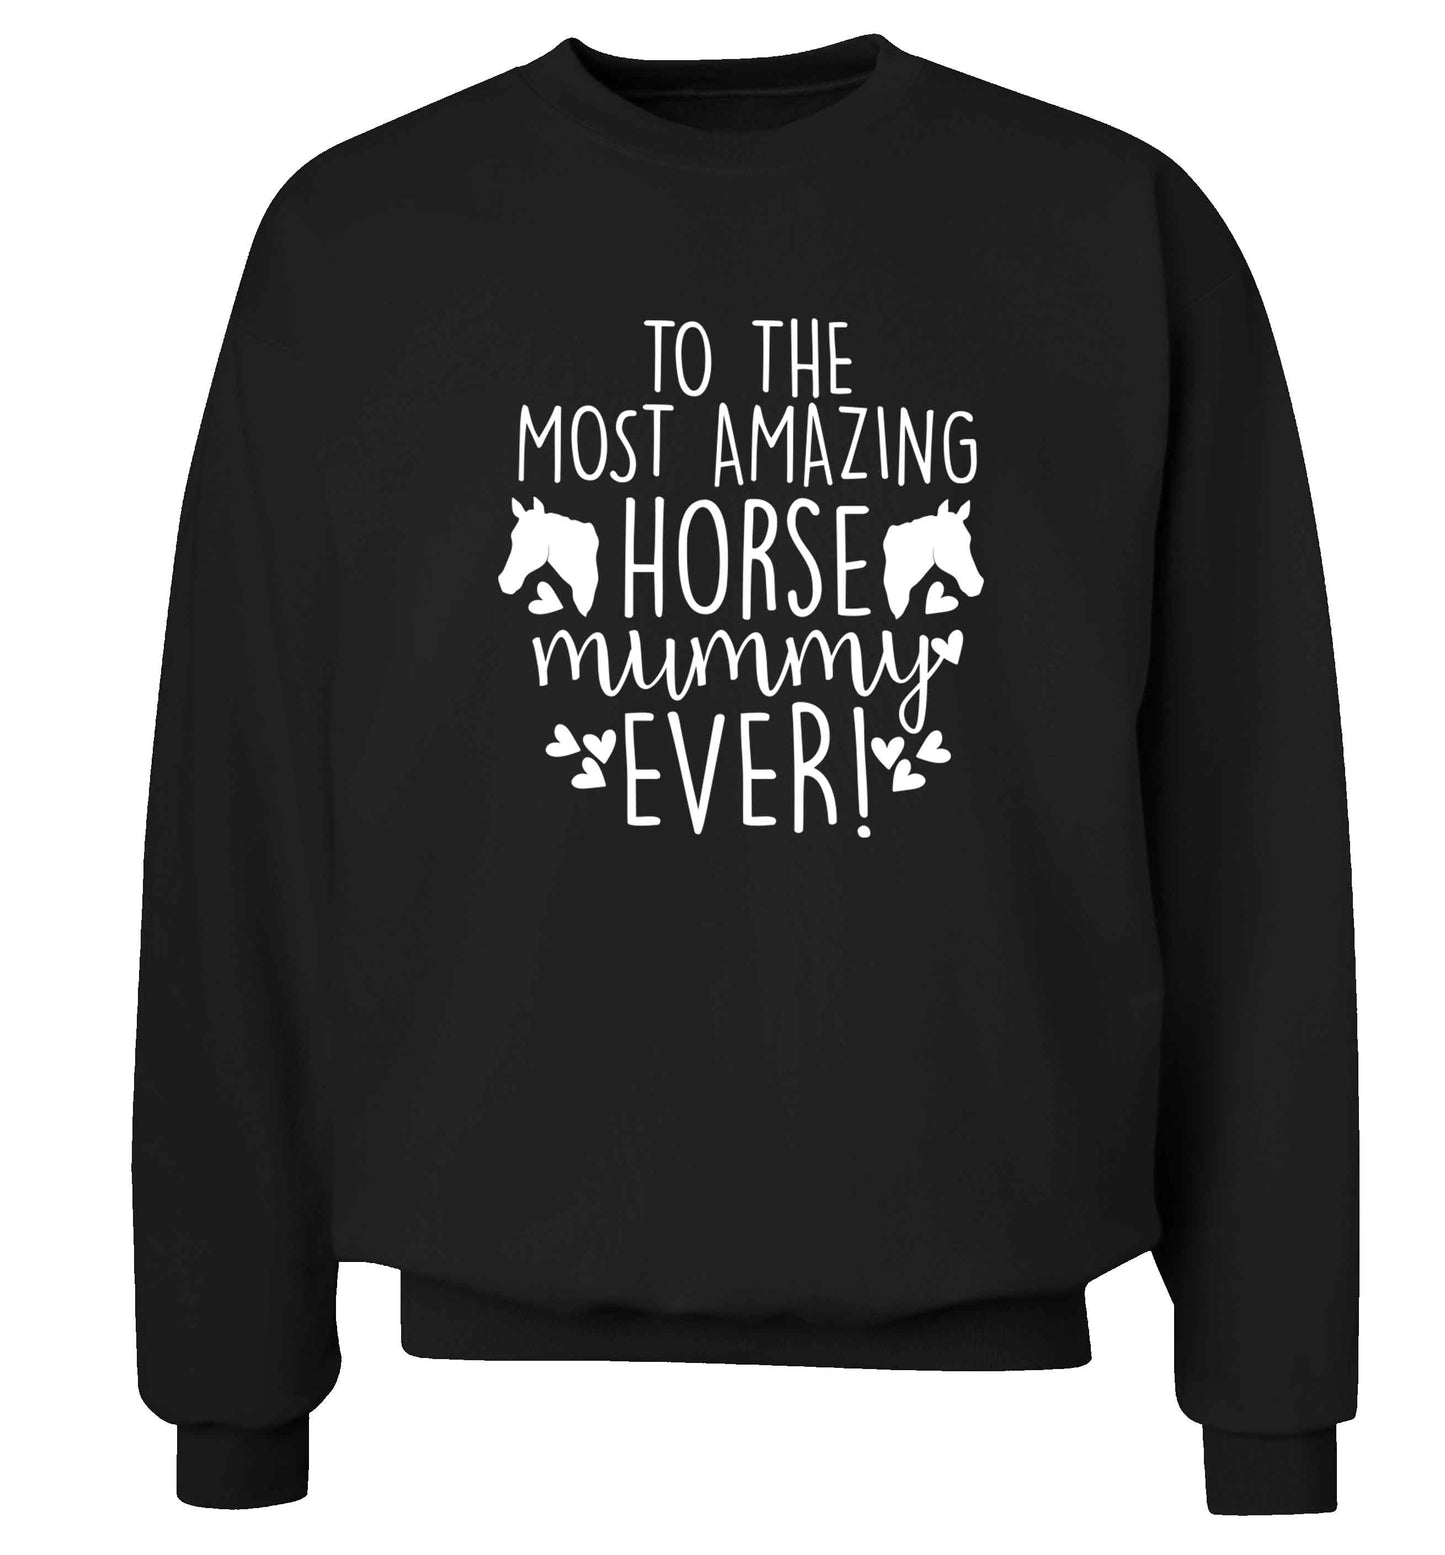 To the most amazing horse mummy ever! adult's unisex black sweater 2XL